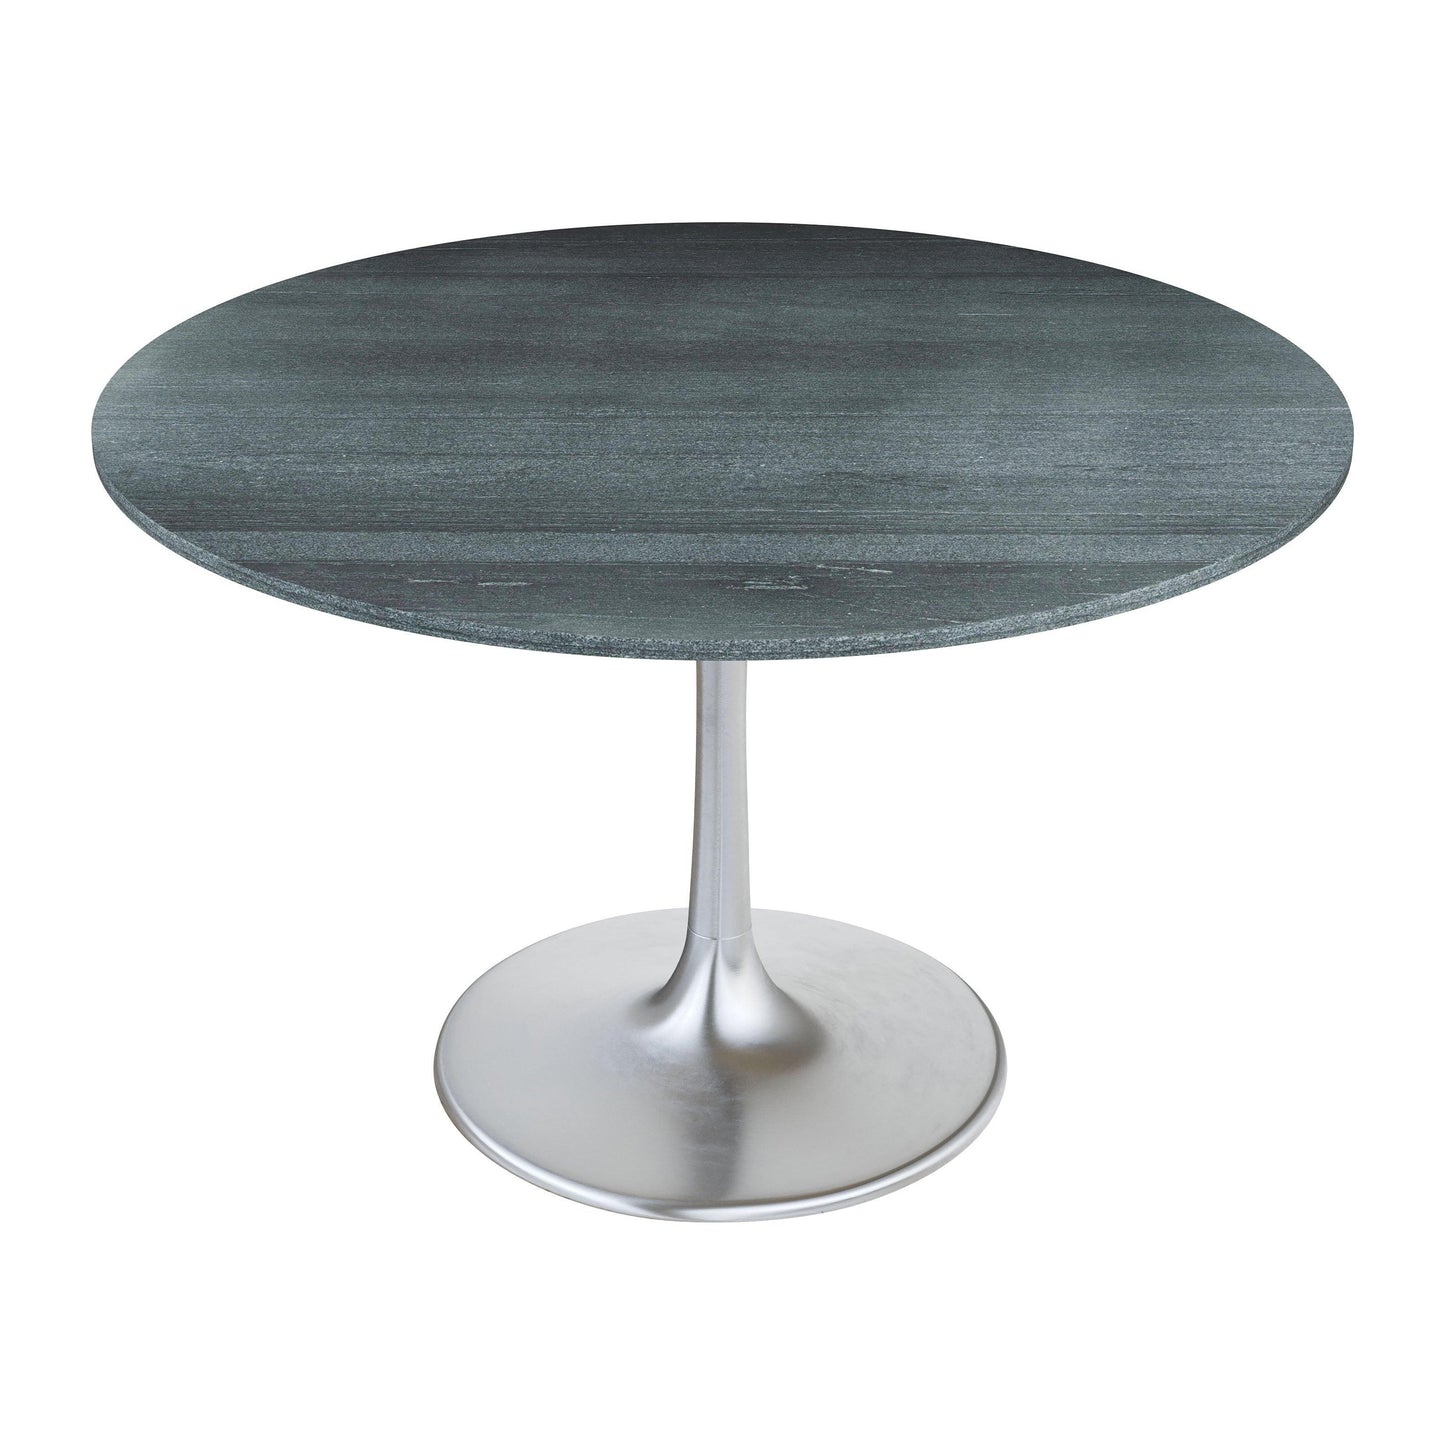 Metropolis Dining Table 48" Black - Sideboards and Things Brand_Zuo Modern, Color_Black, Color_Silver, Finish_Semi Gloss, Materials_Metal, Materials_Stone, Materials_Wood, Metal Type_Aluminum, Metal Type_Iron, Product Type_Dining Height, Shape_Round, Stone Type_Marble, Table Base_Metal, Table Top_Stone, Width_40-50, Wood Species_MDF